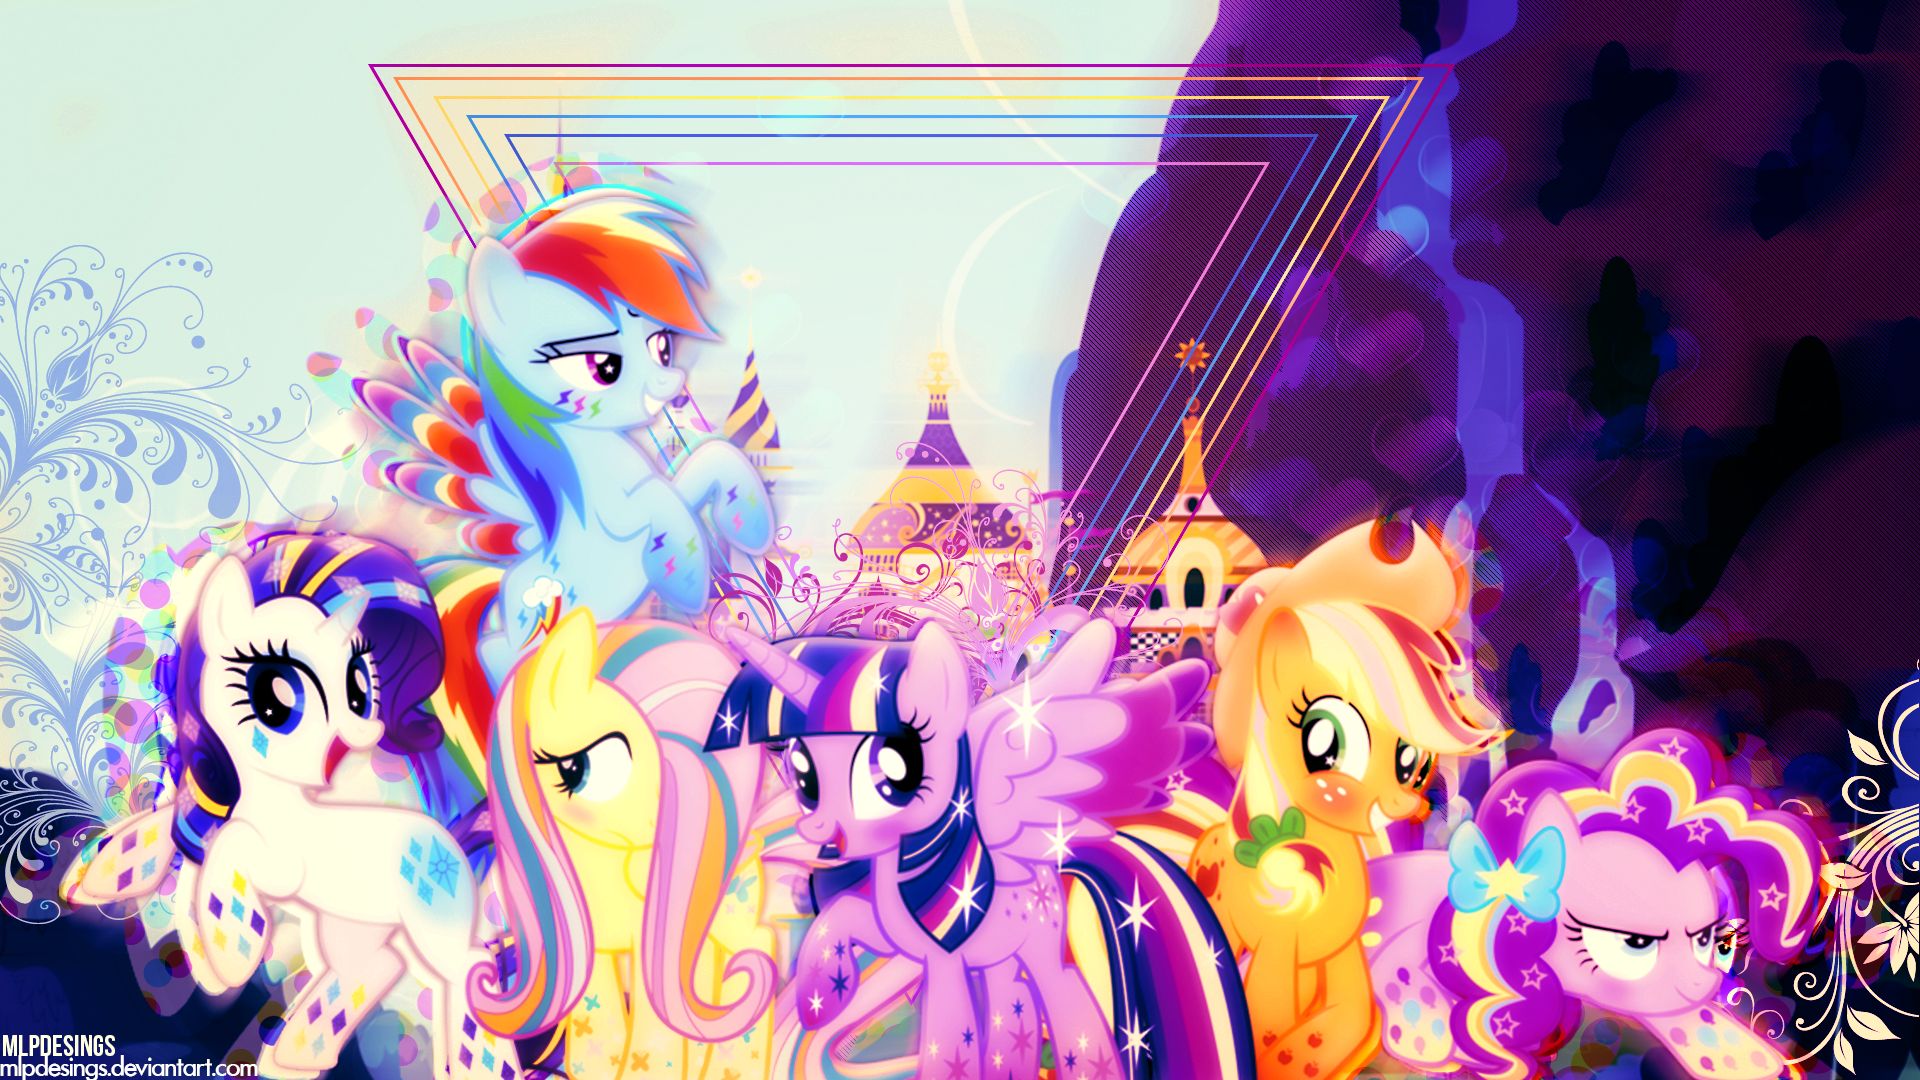 tv show, my little pony: friendship is magic, applejack (my little pony), fluttershy (my little pony), my little pony, pinkie pie, rainbow dash, rarity (my little pony), twilight sparkle, vector cell phone wallpapers